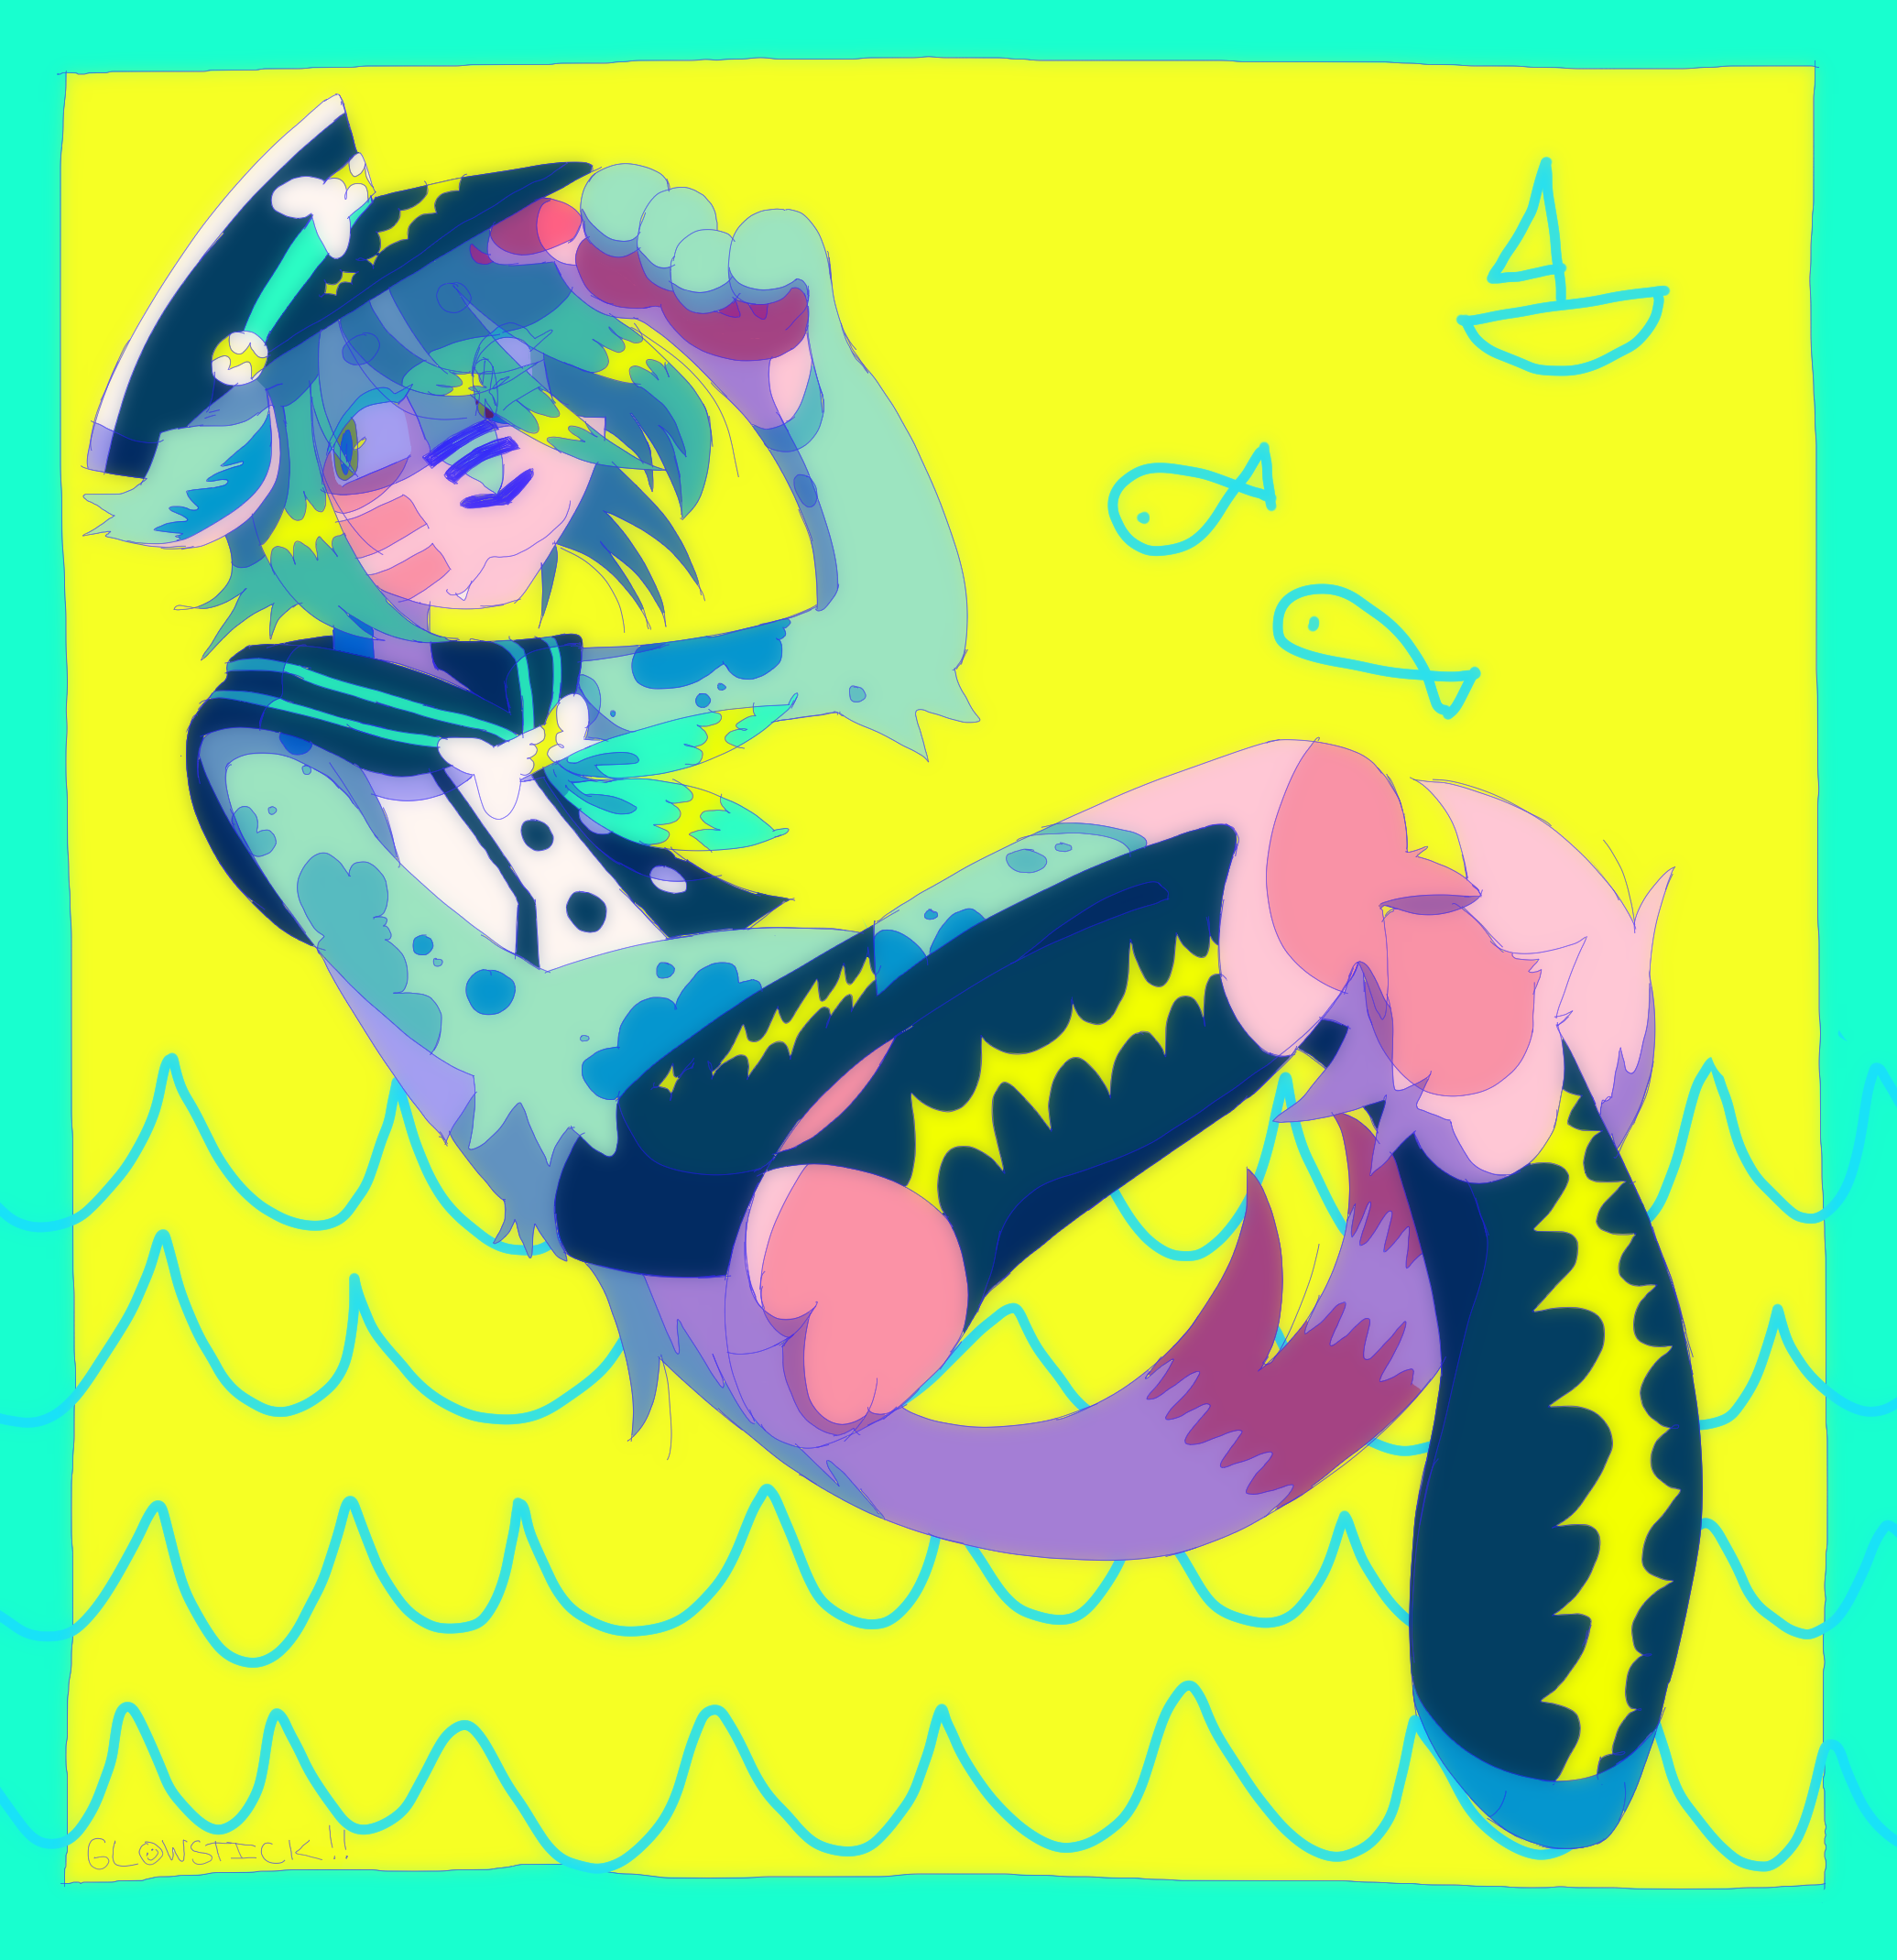 A drawing of a peach and teal colored dog girl wearing a sailor's outfit. She has her legs crossed and is tipping her hat towards the camera. The background is bright yellow and cyan, and has a nautical theme.